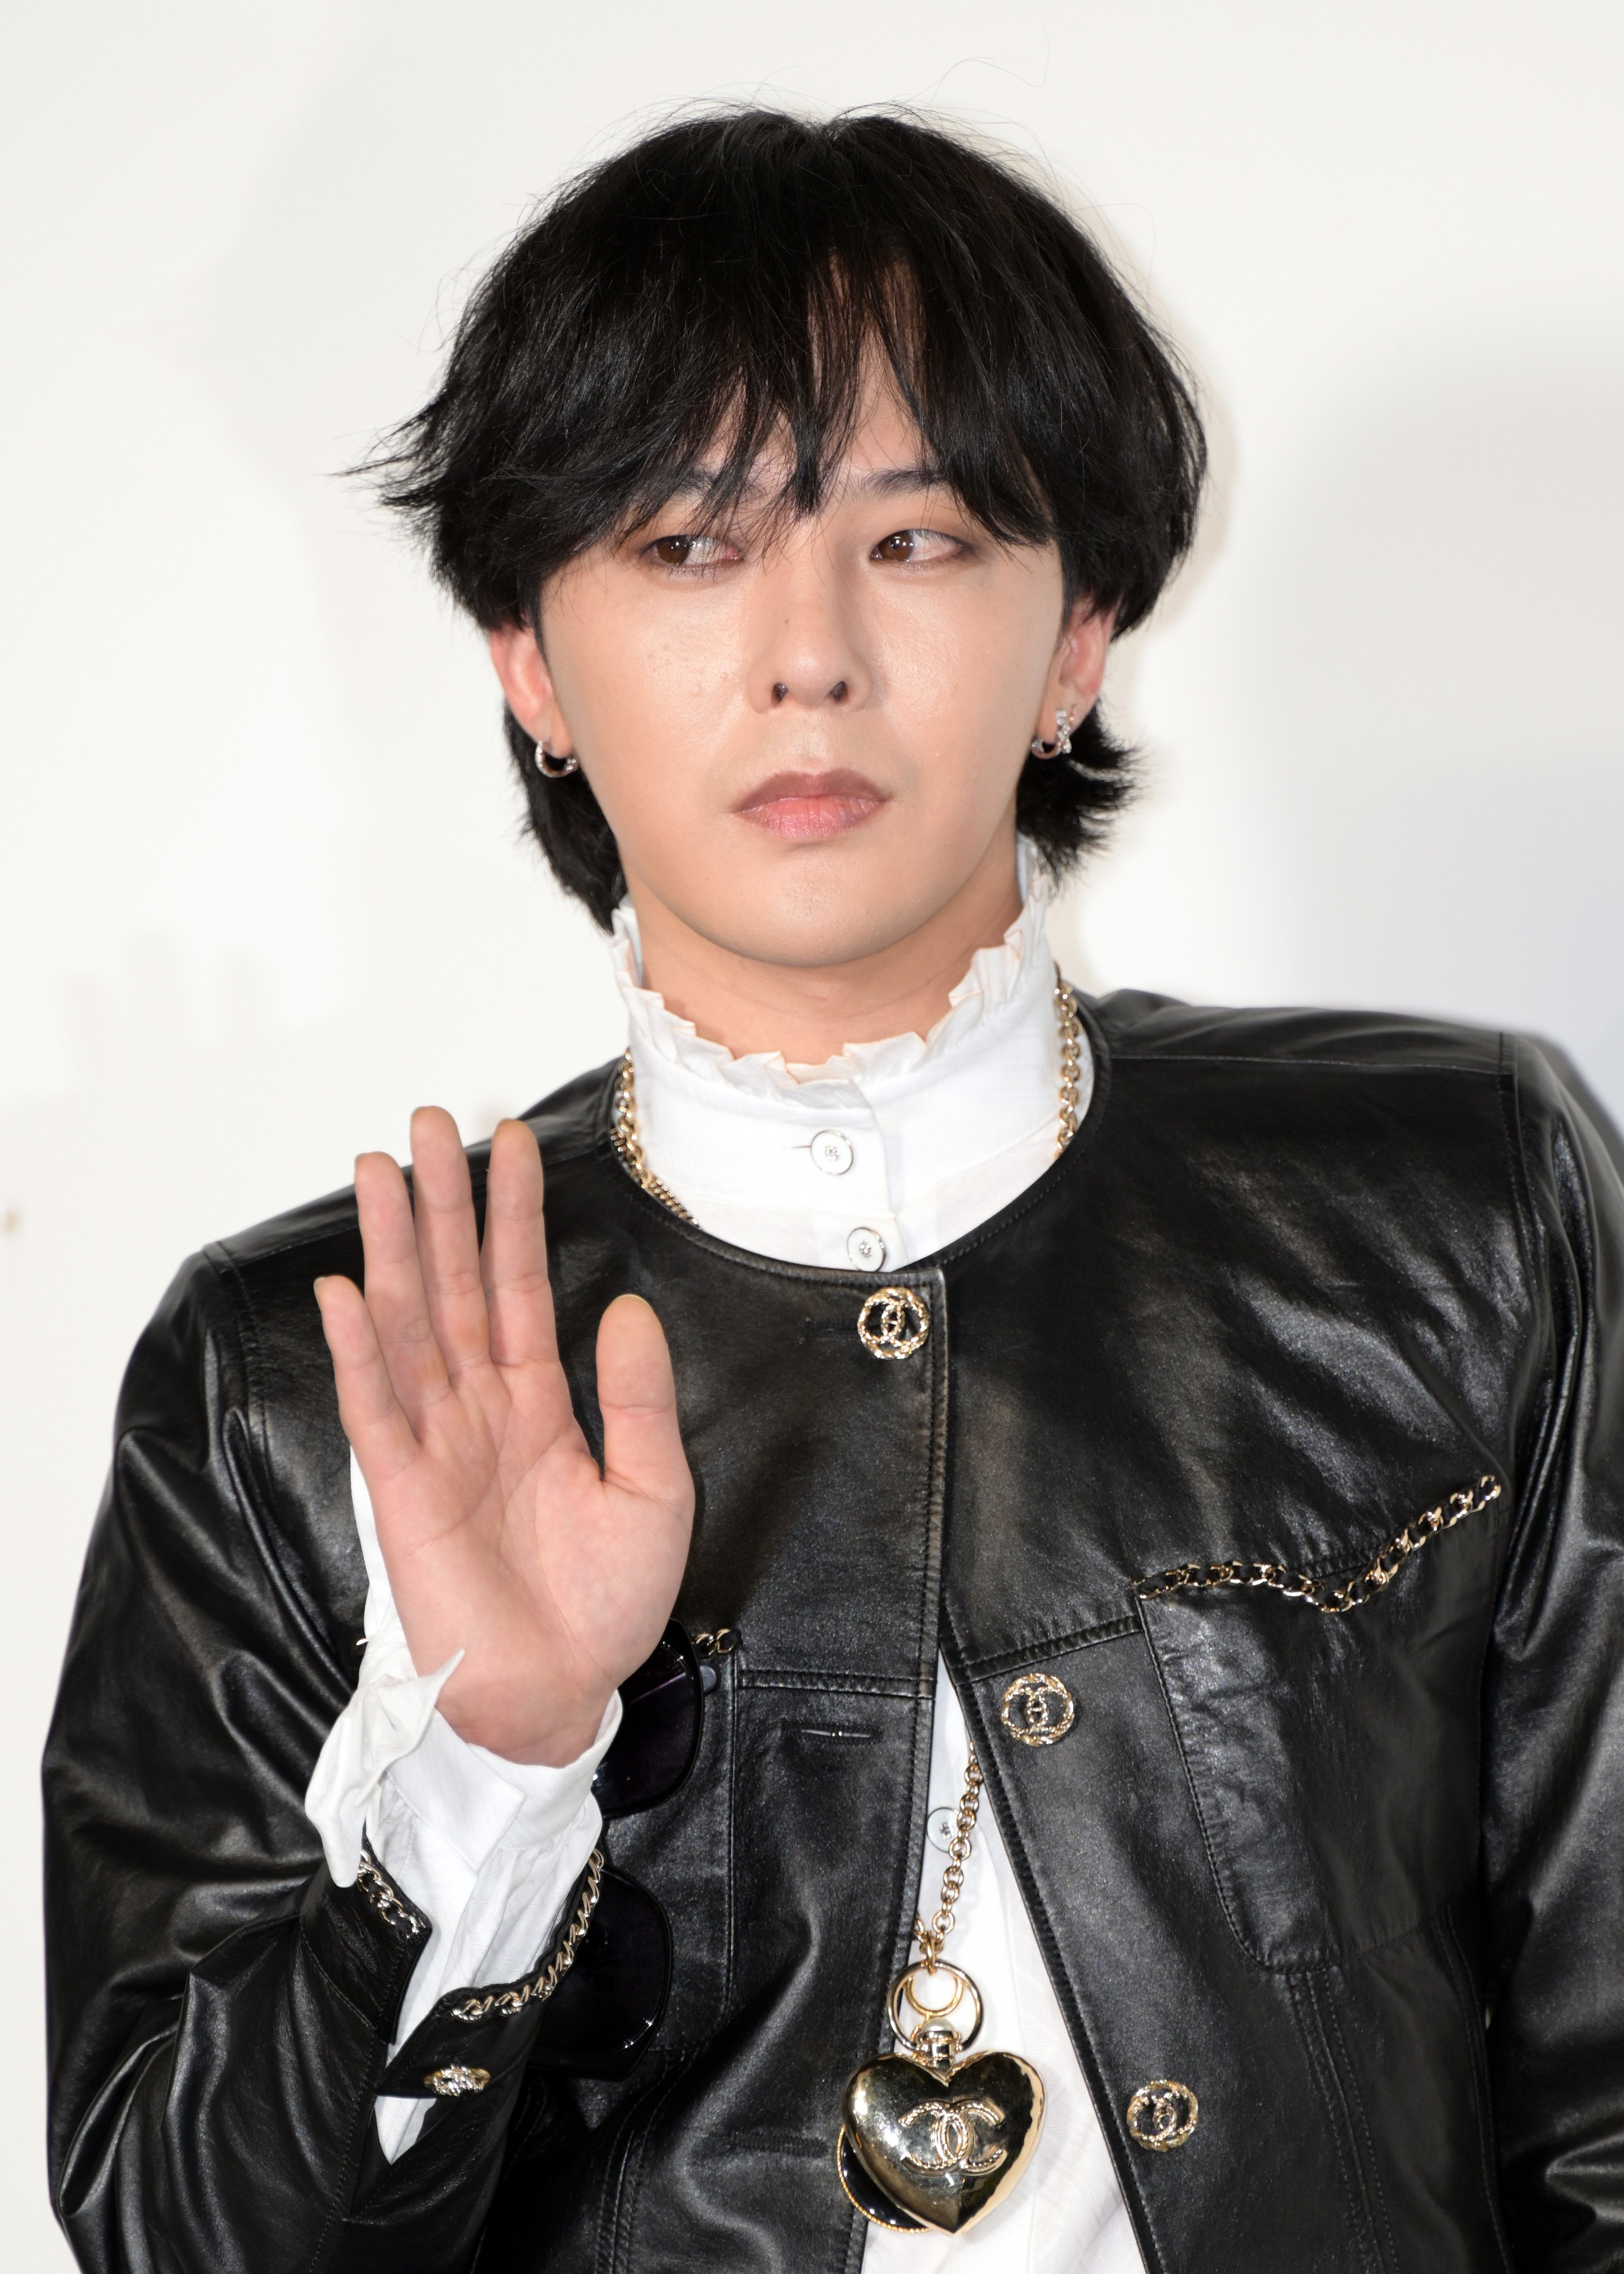 Singer G-Dragon attends a Chanel reception in September 2023 in Seoul, South Korea. The K-pop star has been charged with using illegal drugs.Photo: The Chosun Ilbo/JNS/Imazins via Getty Images